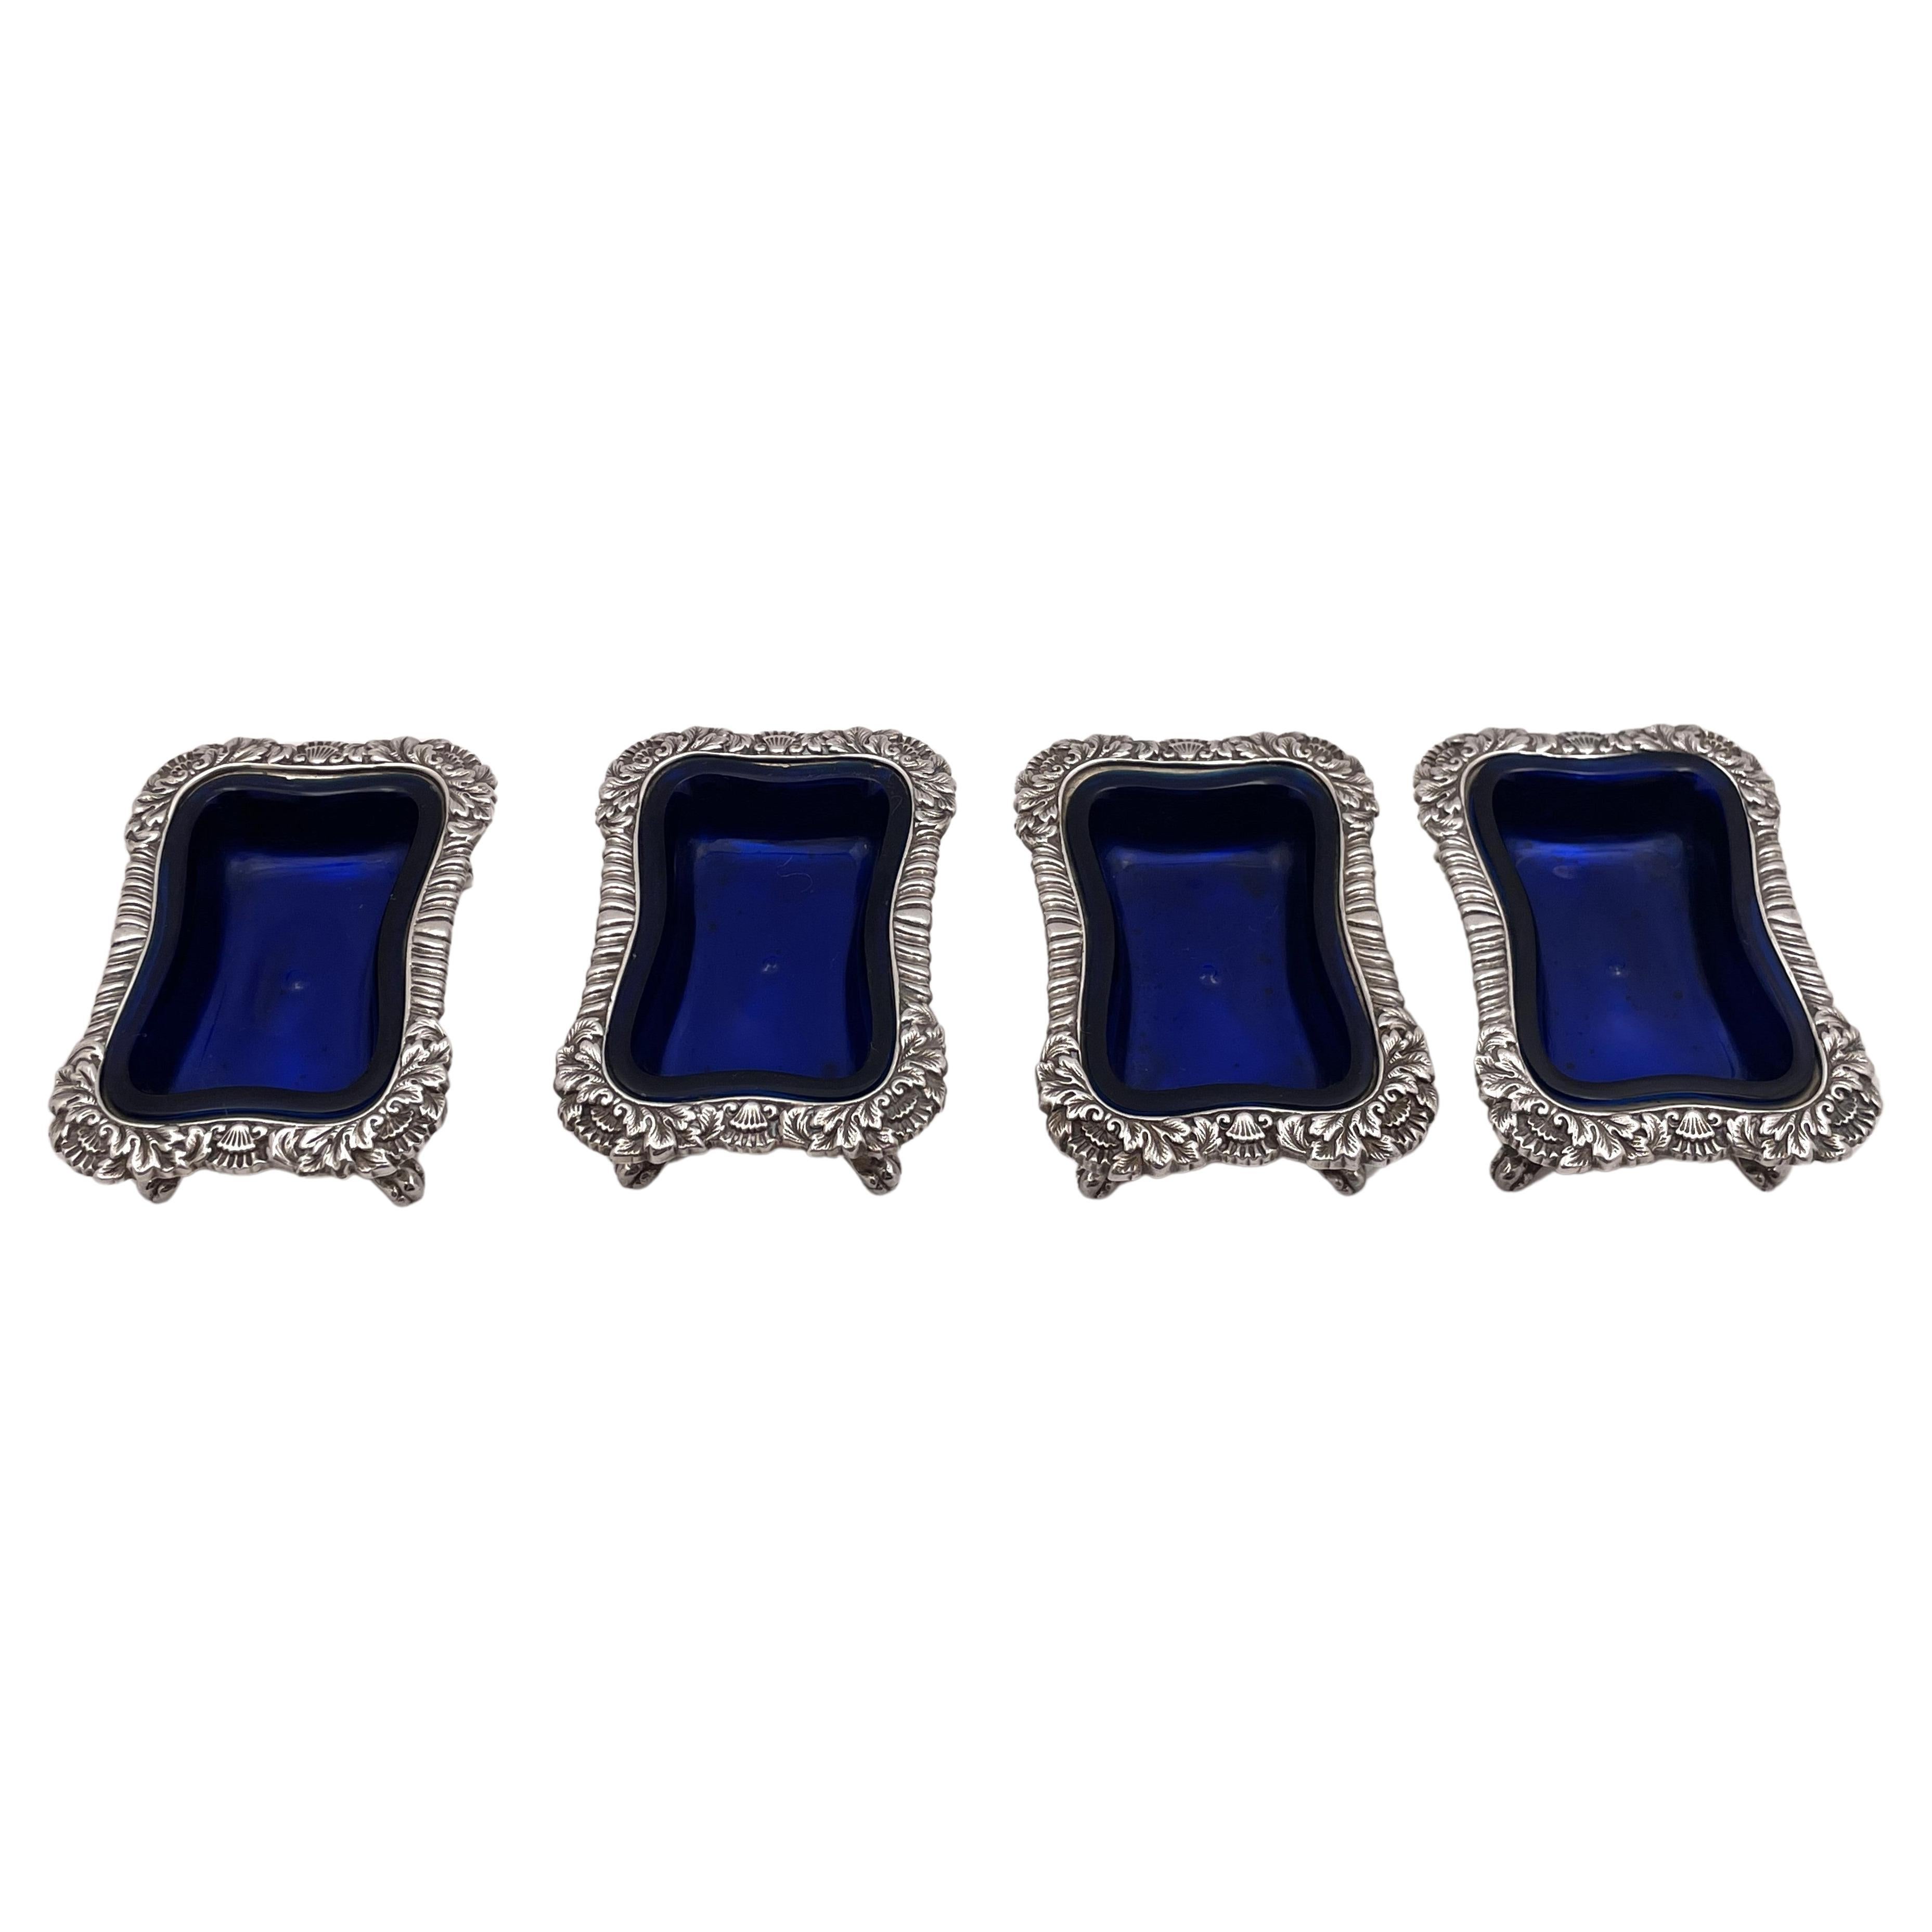 Tiffany & Co. Set of 4 Sterling Silver 1879 Open Salt Cellars with Blue Liners